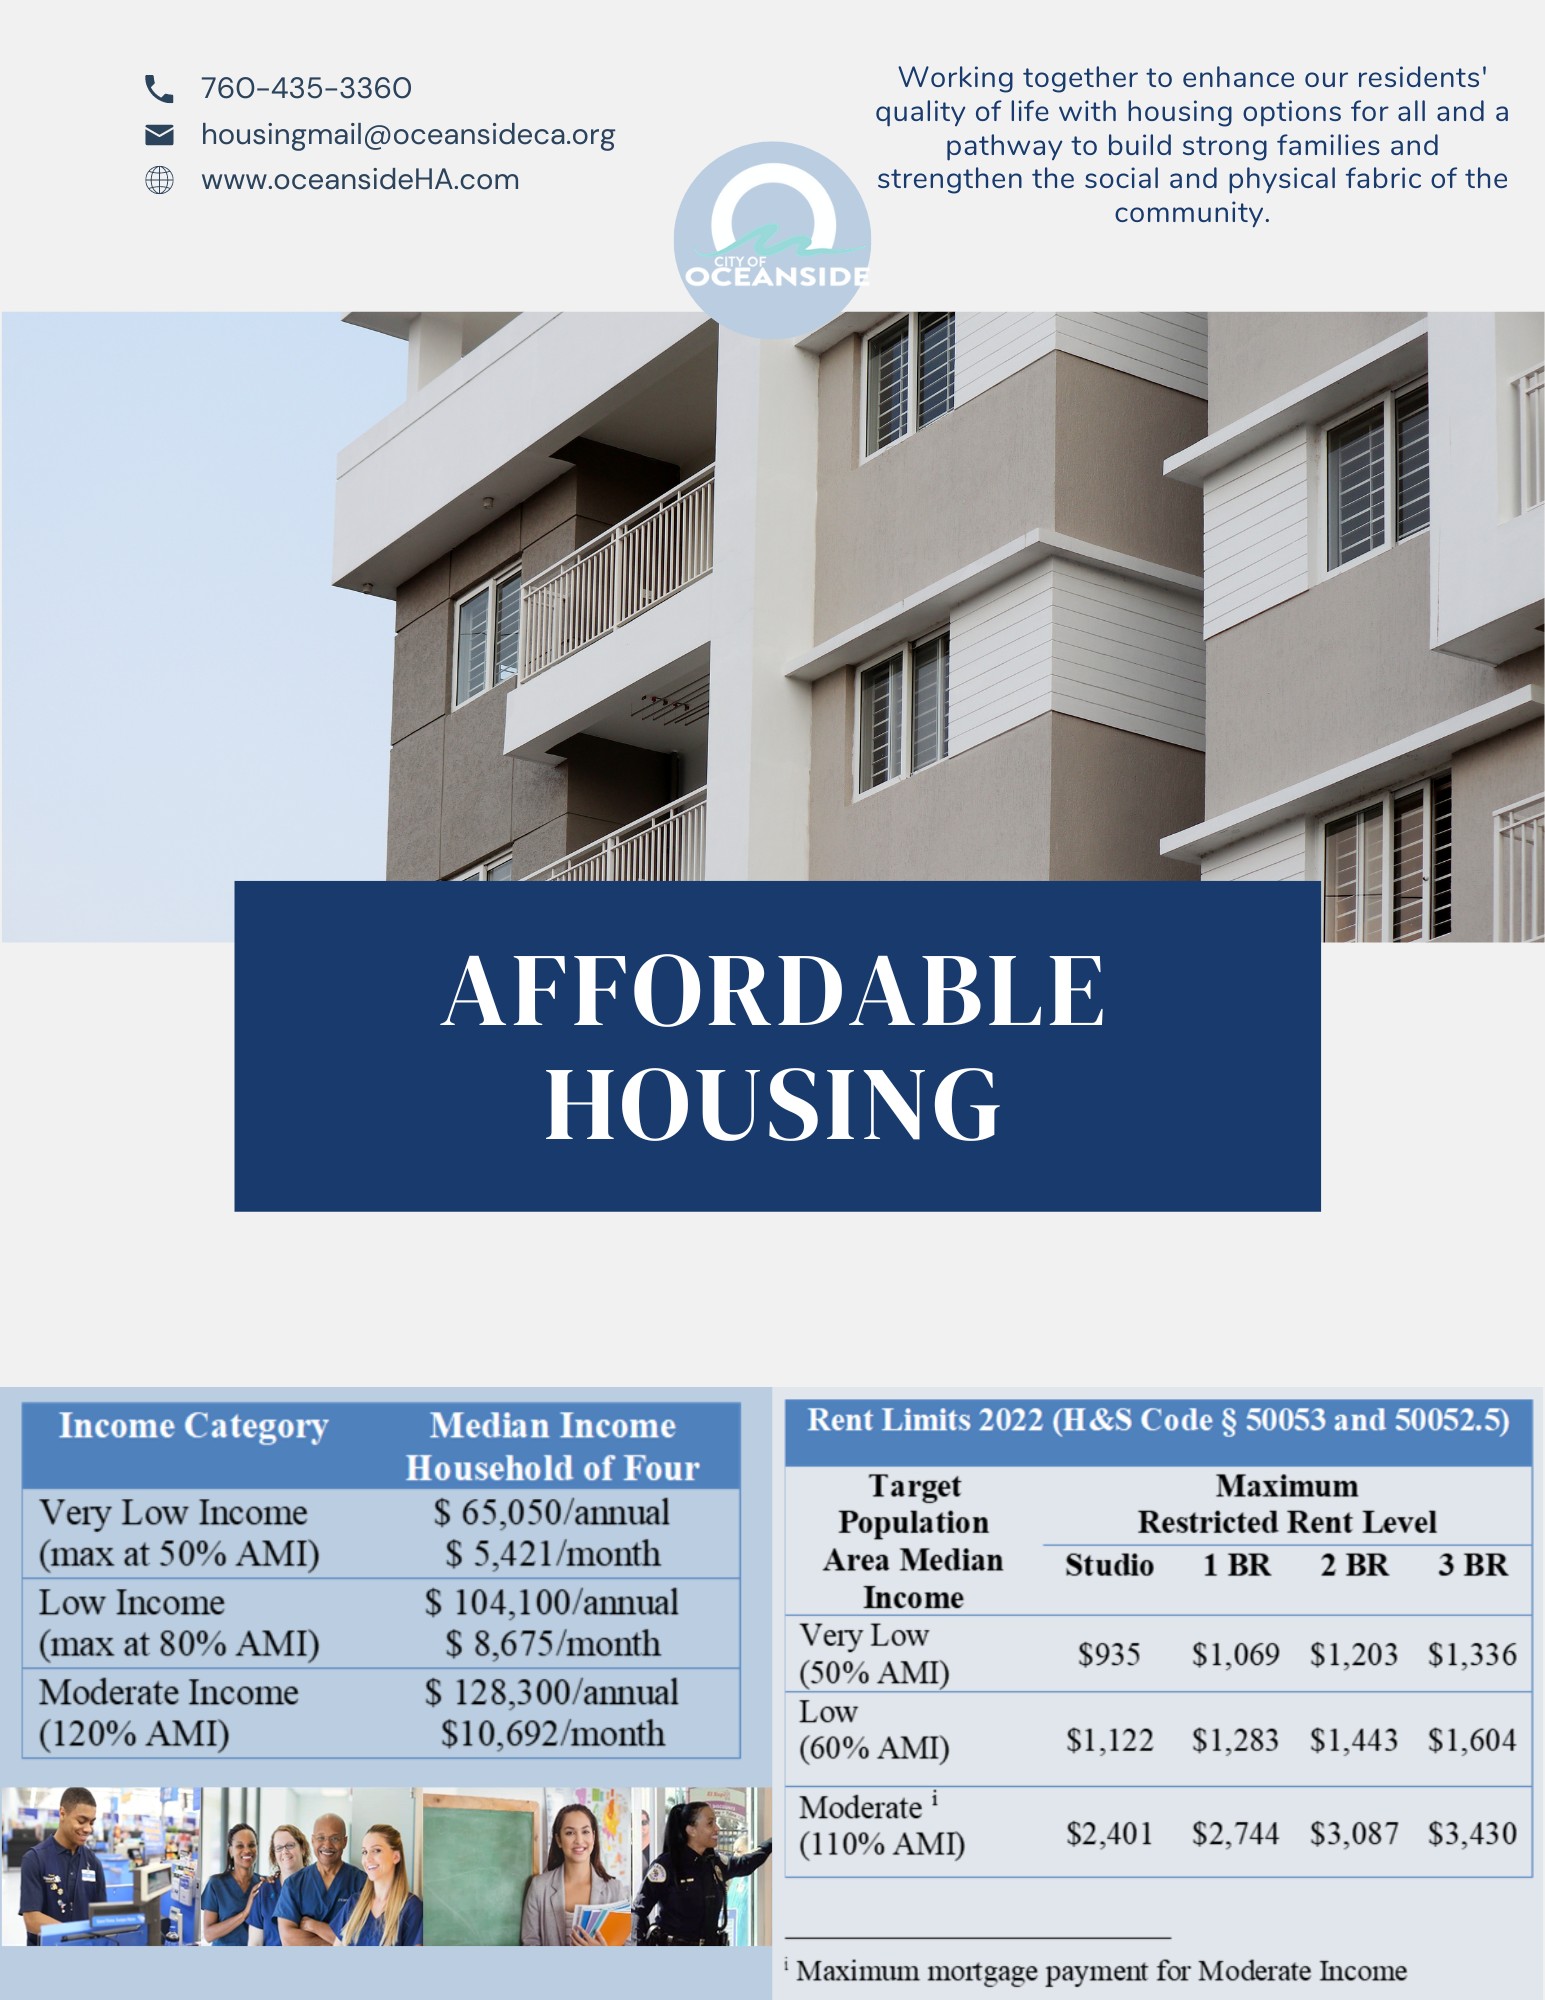 Income Eligibility and Affordable Housing Cost Chart